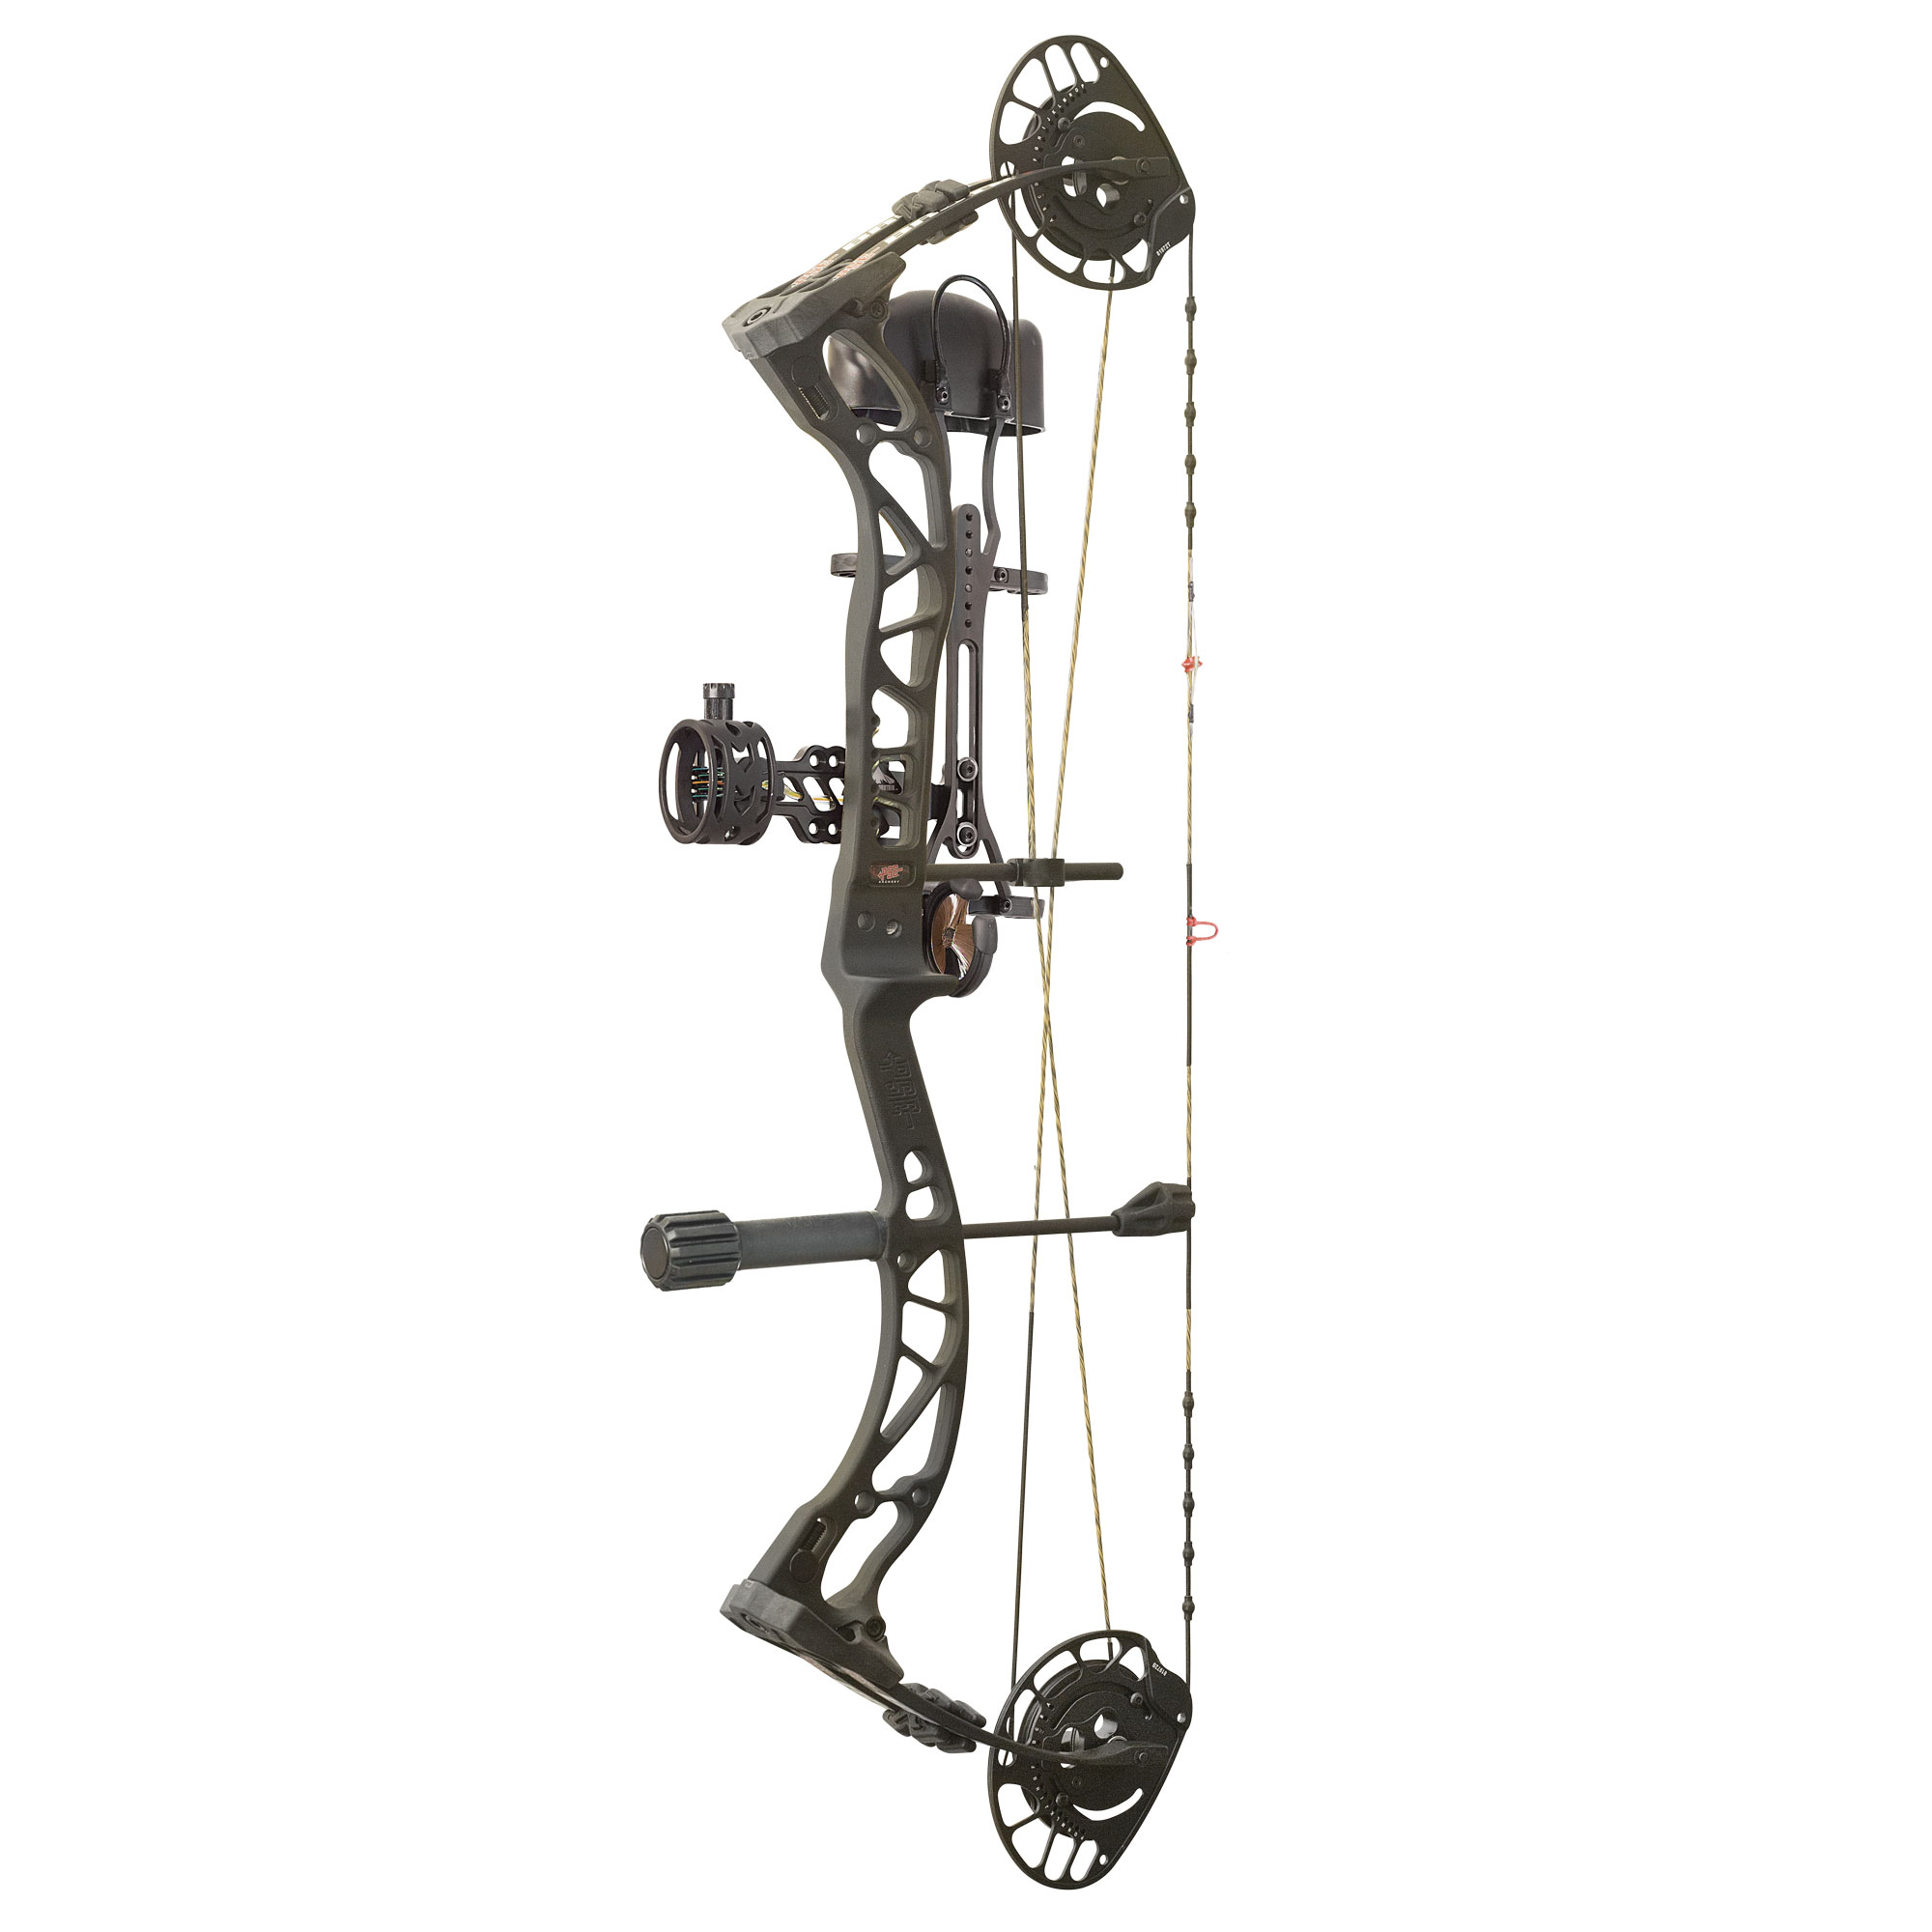 PSE Brute NXT youth bow.